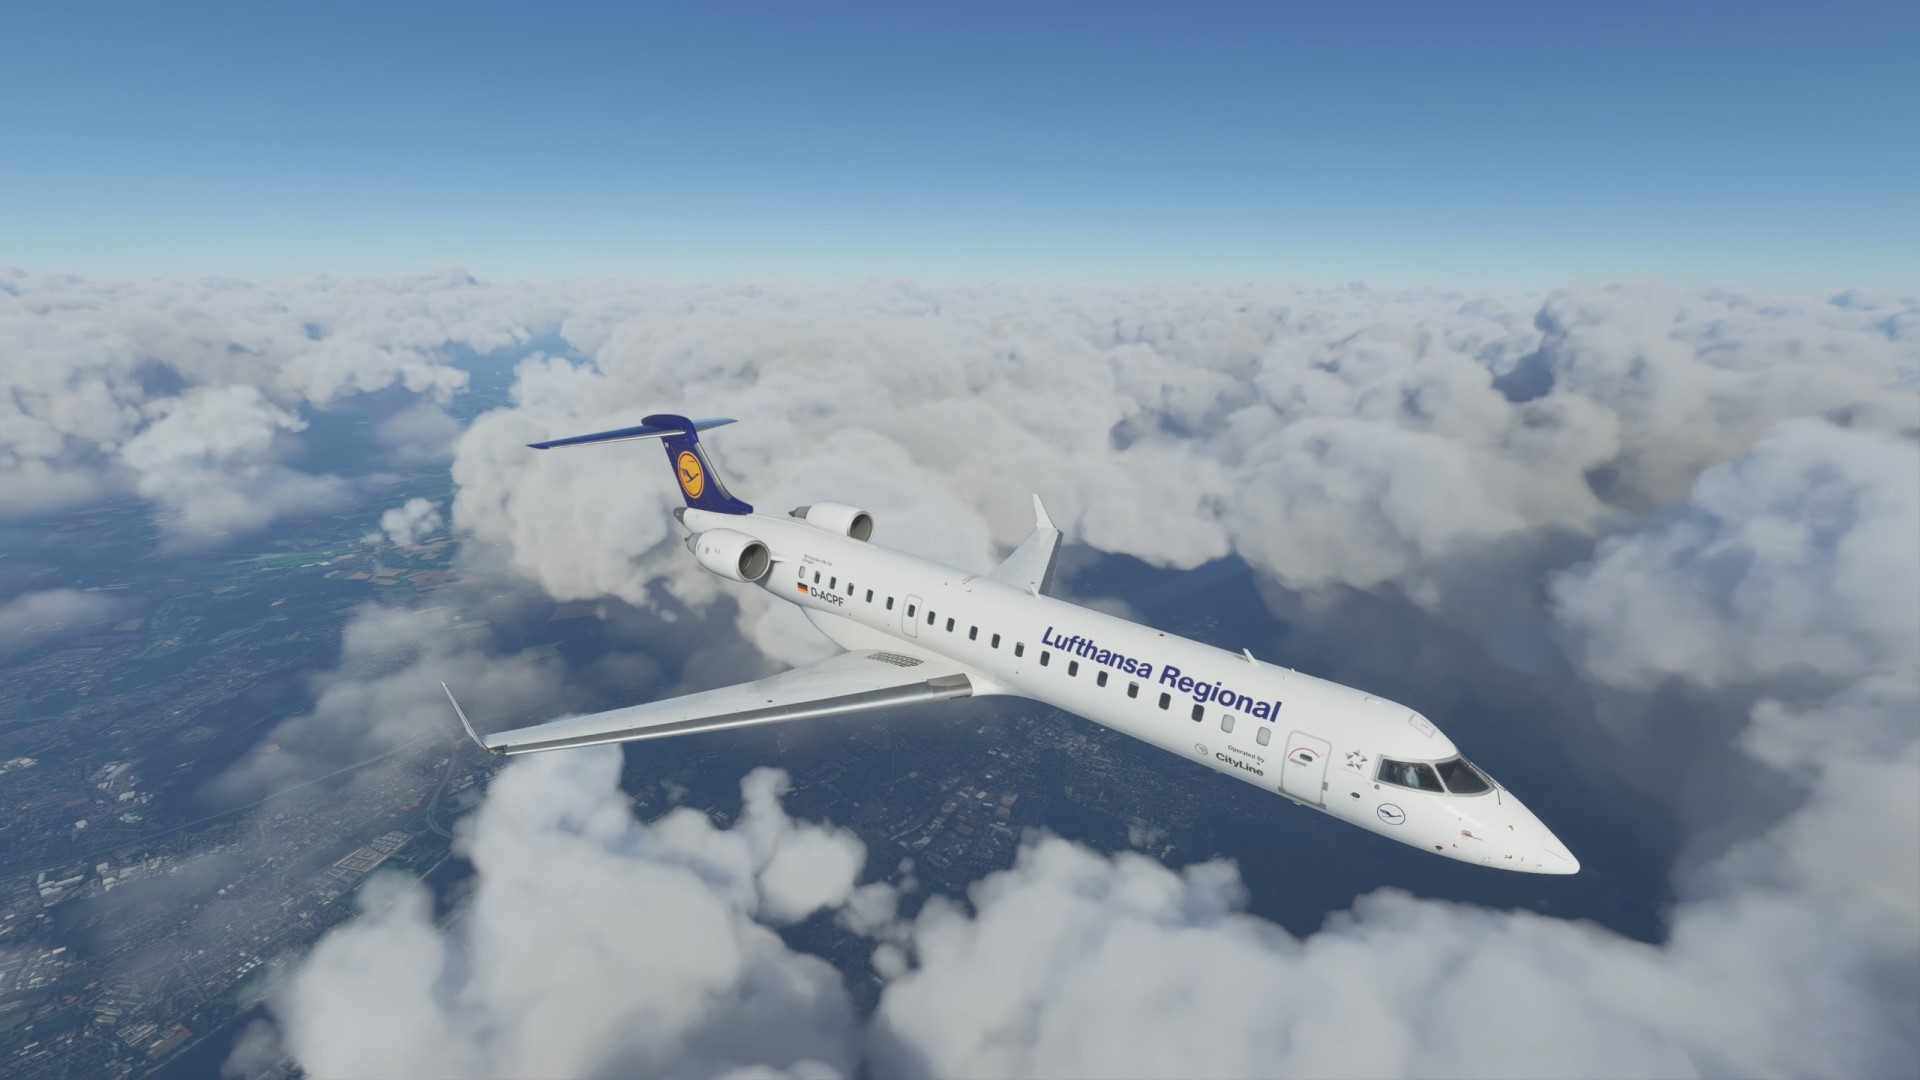 Best simulation games: Microsoft Flight Simulator. Image shows a Lufthansa plane flying above the clouds.